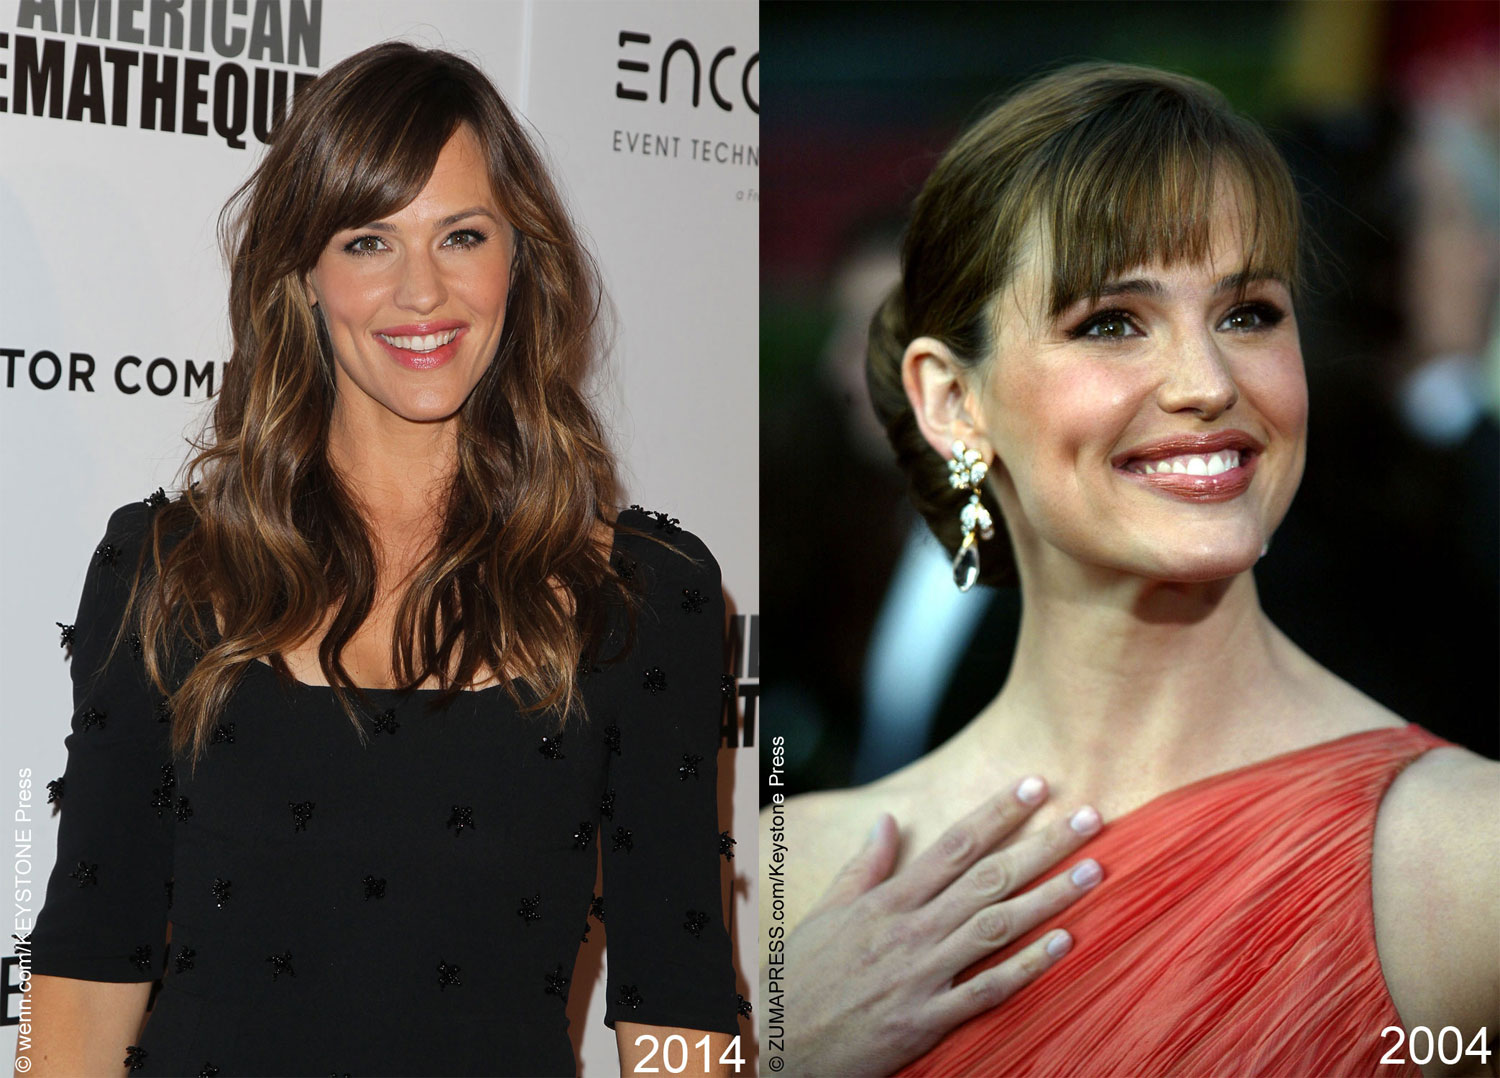 Where are your wrinkles Jennifer Garner? She has two kids and still looks as good as she did when starring in the hit TV series Alias.